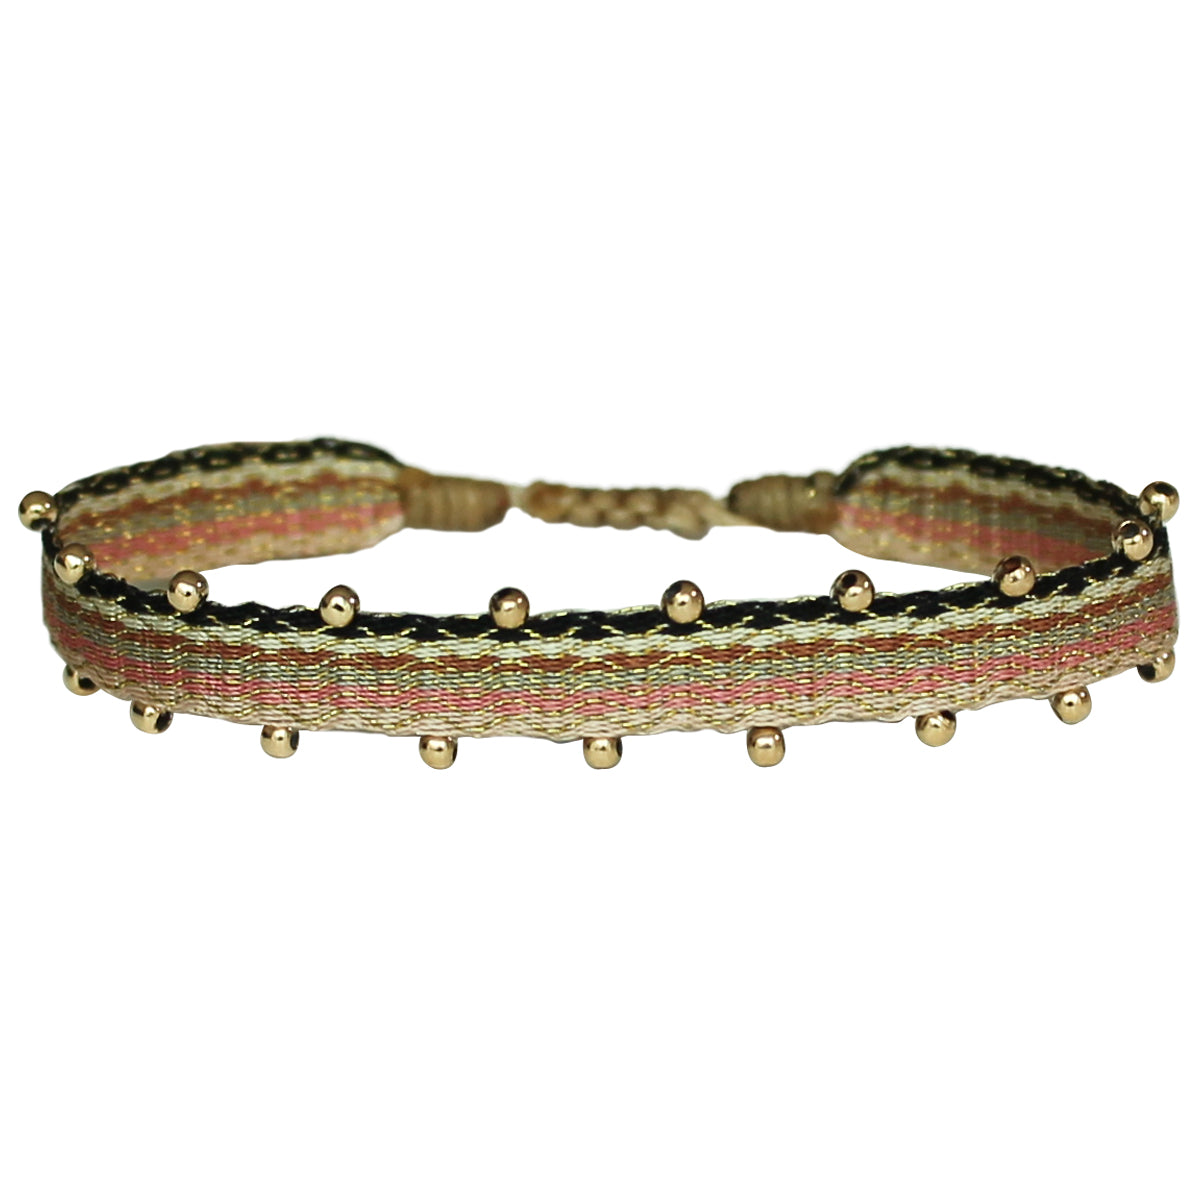 HANDMADE BEADED BRACELET IN NEUTRAL TONES WITH GOLD DETAILS